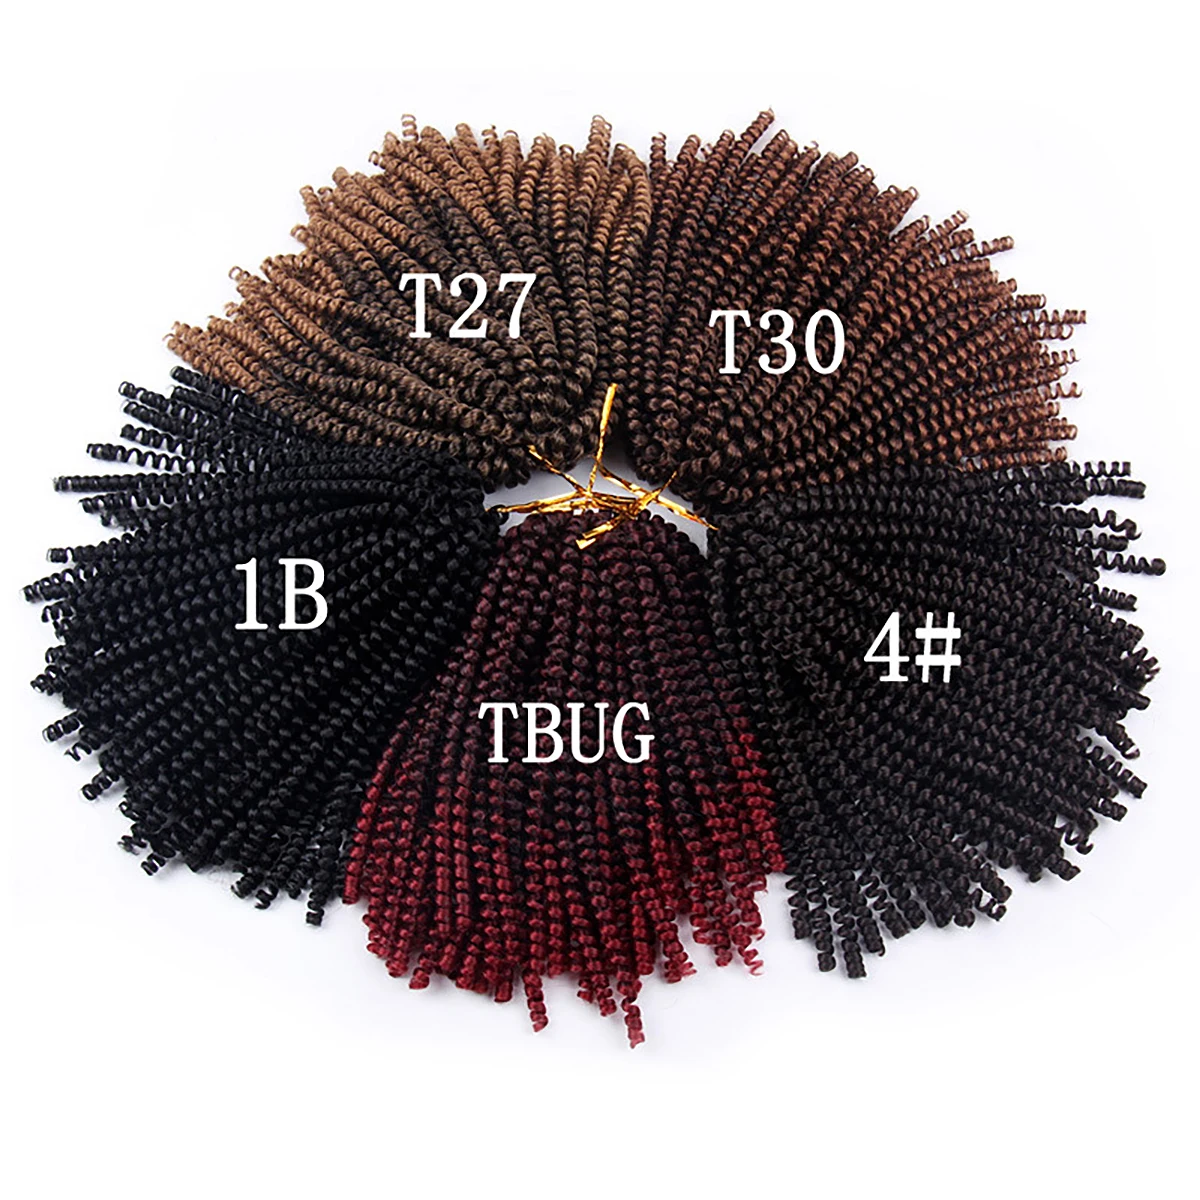 

Spring Twist Crochet Hair 8 Inch Short Ombre Crochet Braids Synthetic Braiding Hair Extensions Jamaican Bounce Curl, Brown/blonde/black/pink/purple/ombre/gradient color